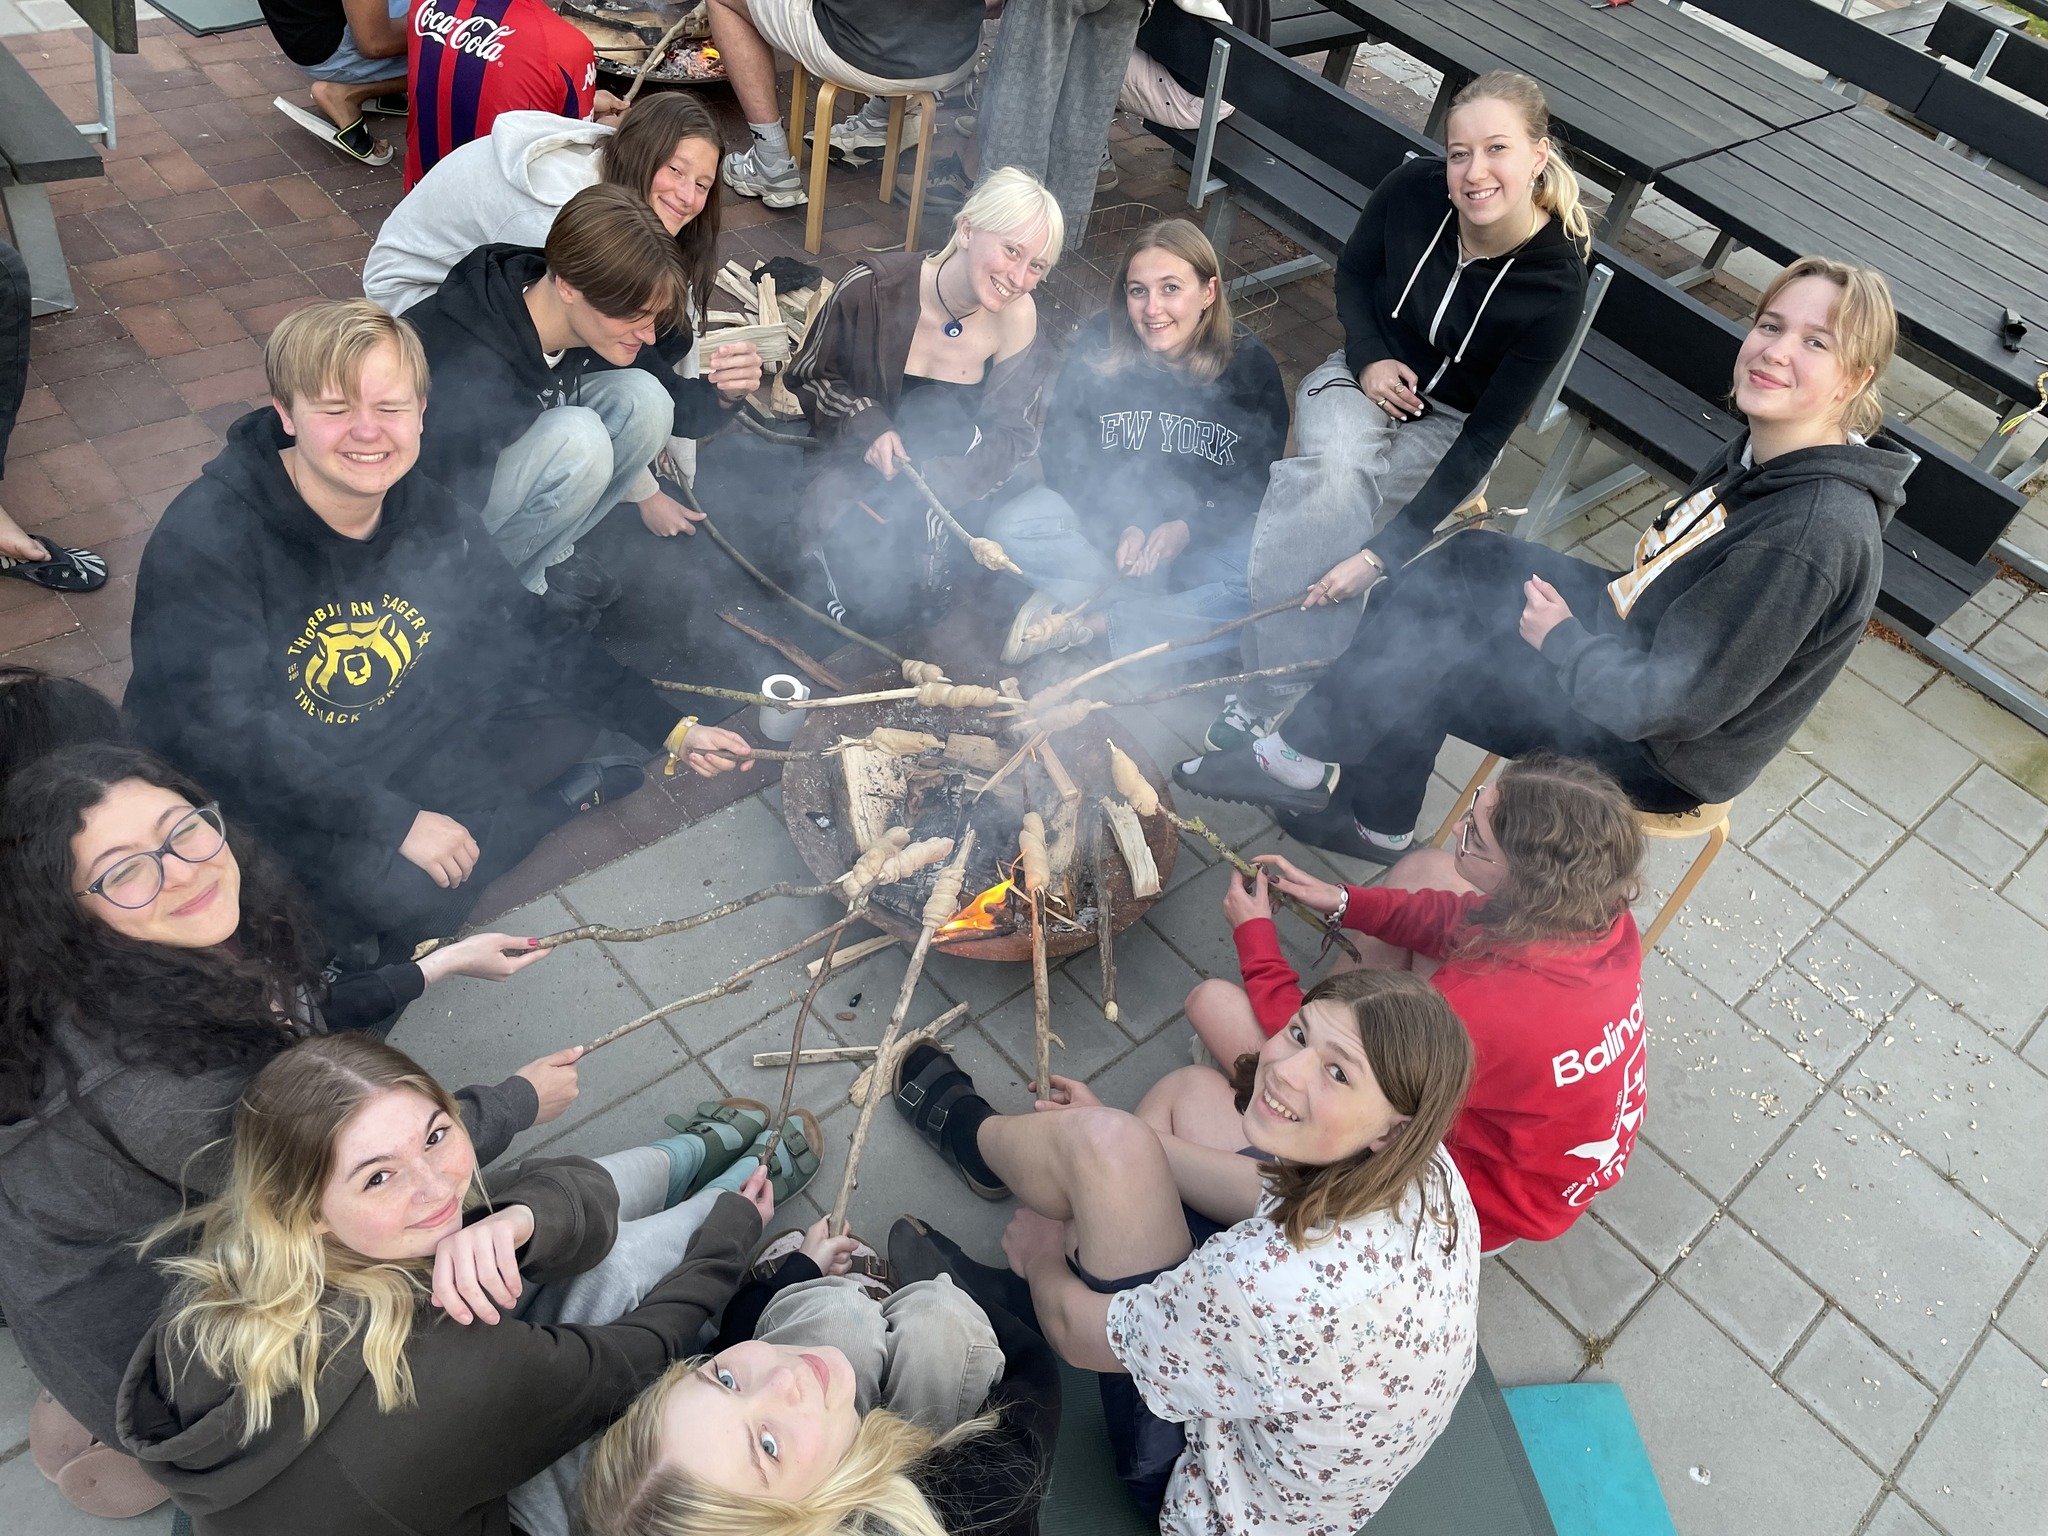 Some of our international students have never made &quot;snobr&oslash;d&quot; before - can you
believe it?! 🔥🥖 And what is &quot;snobr&oslash;d&quot; called in english anyway? 🤔 #snobr&oslash;d #curlybread